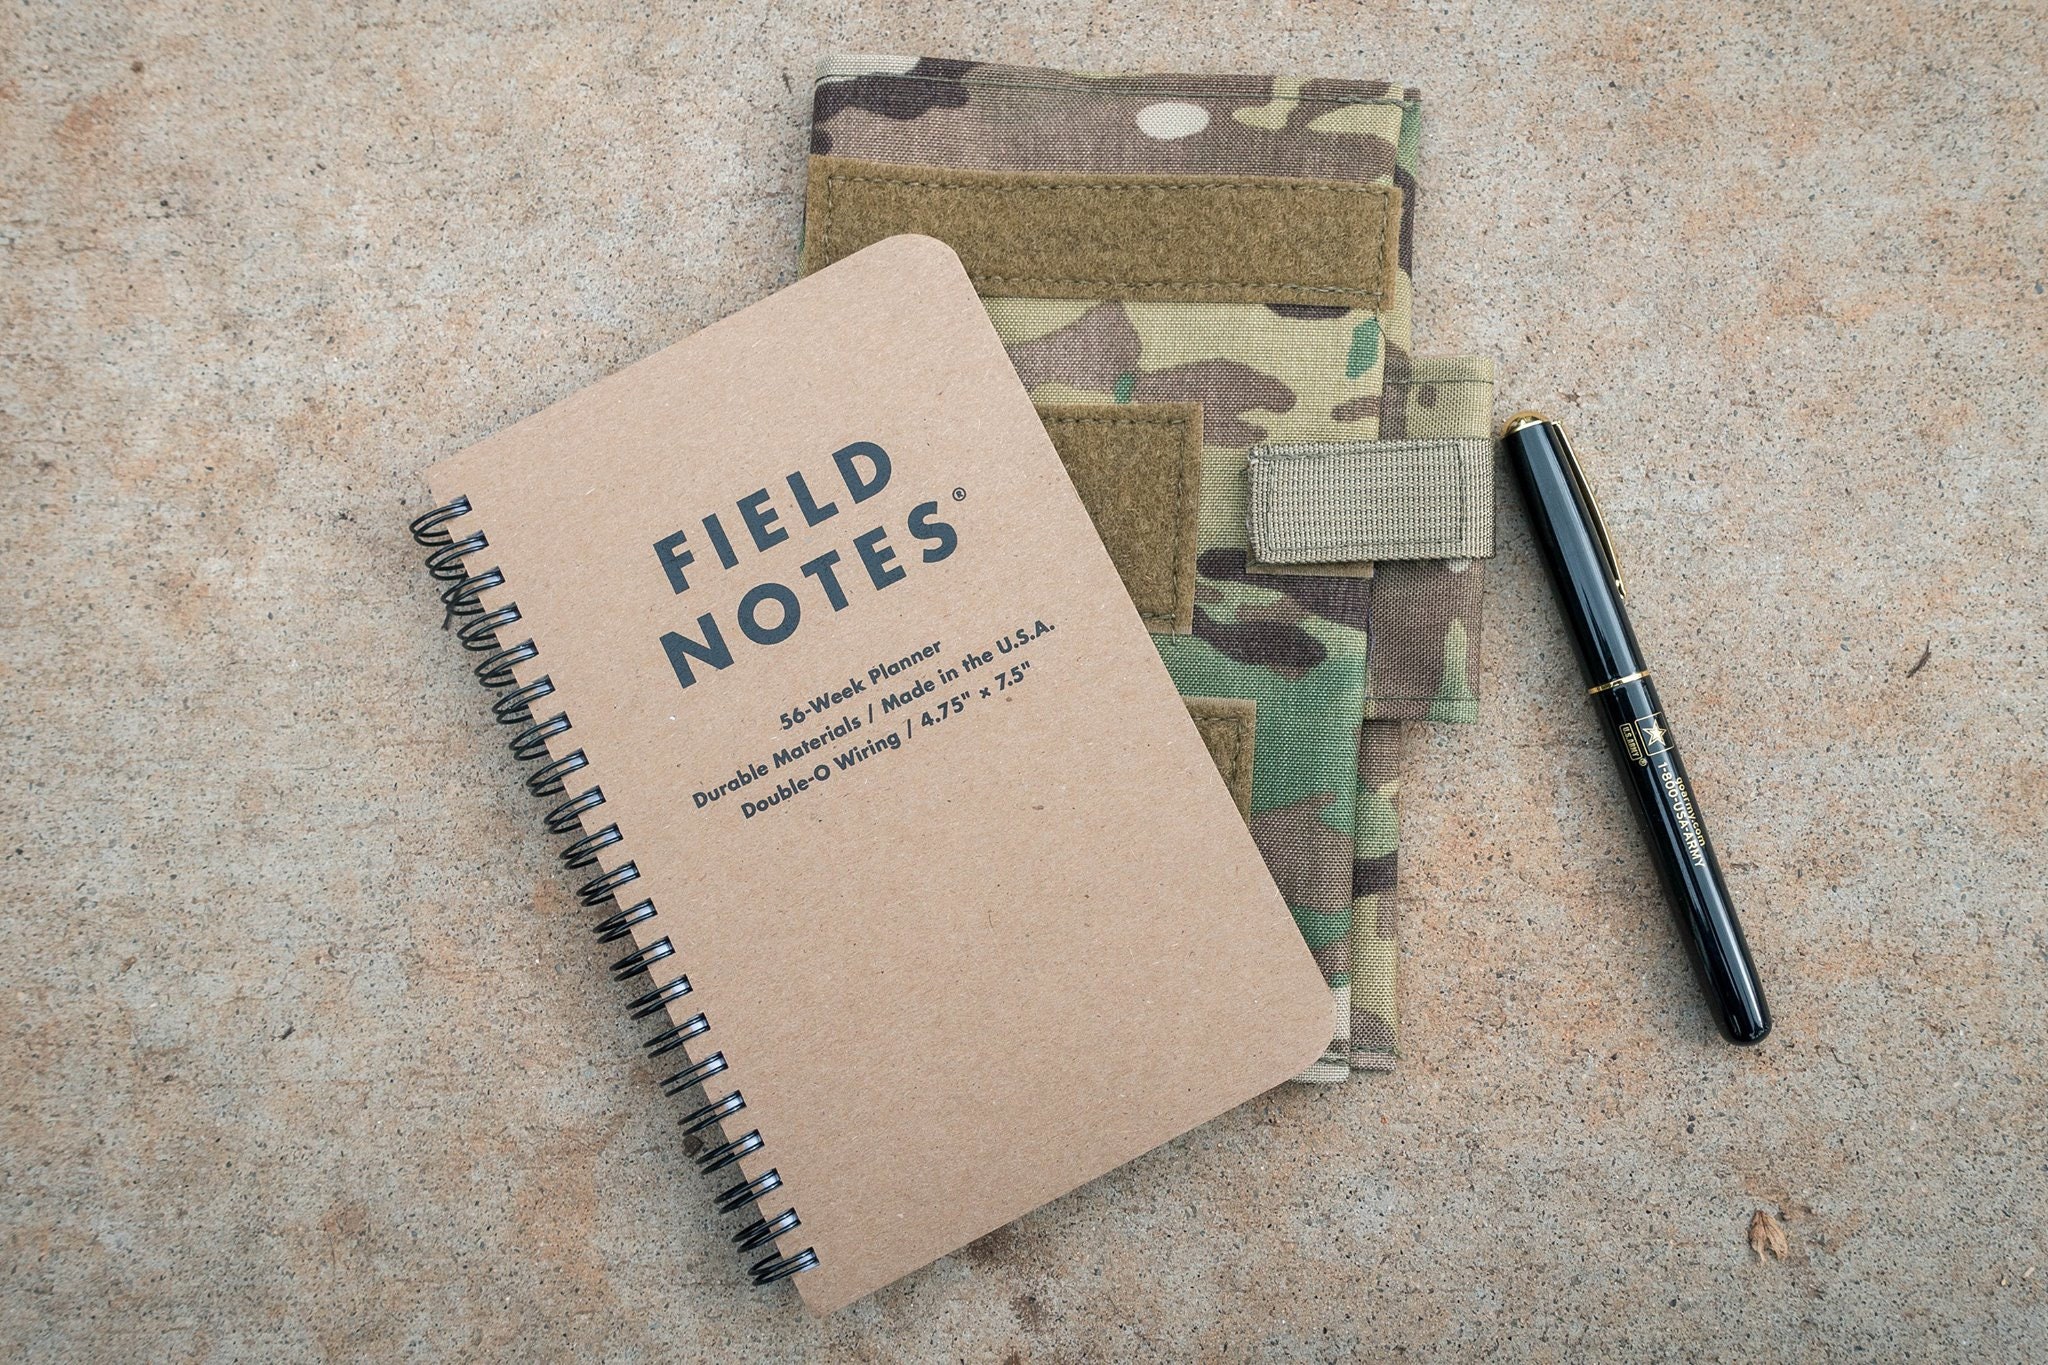 Rite in the Rain All-Weather Durable Pen, OD Green